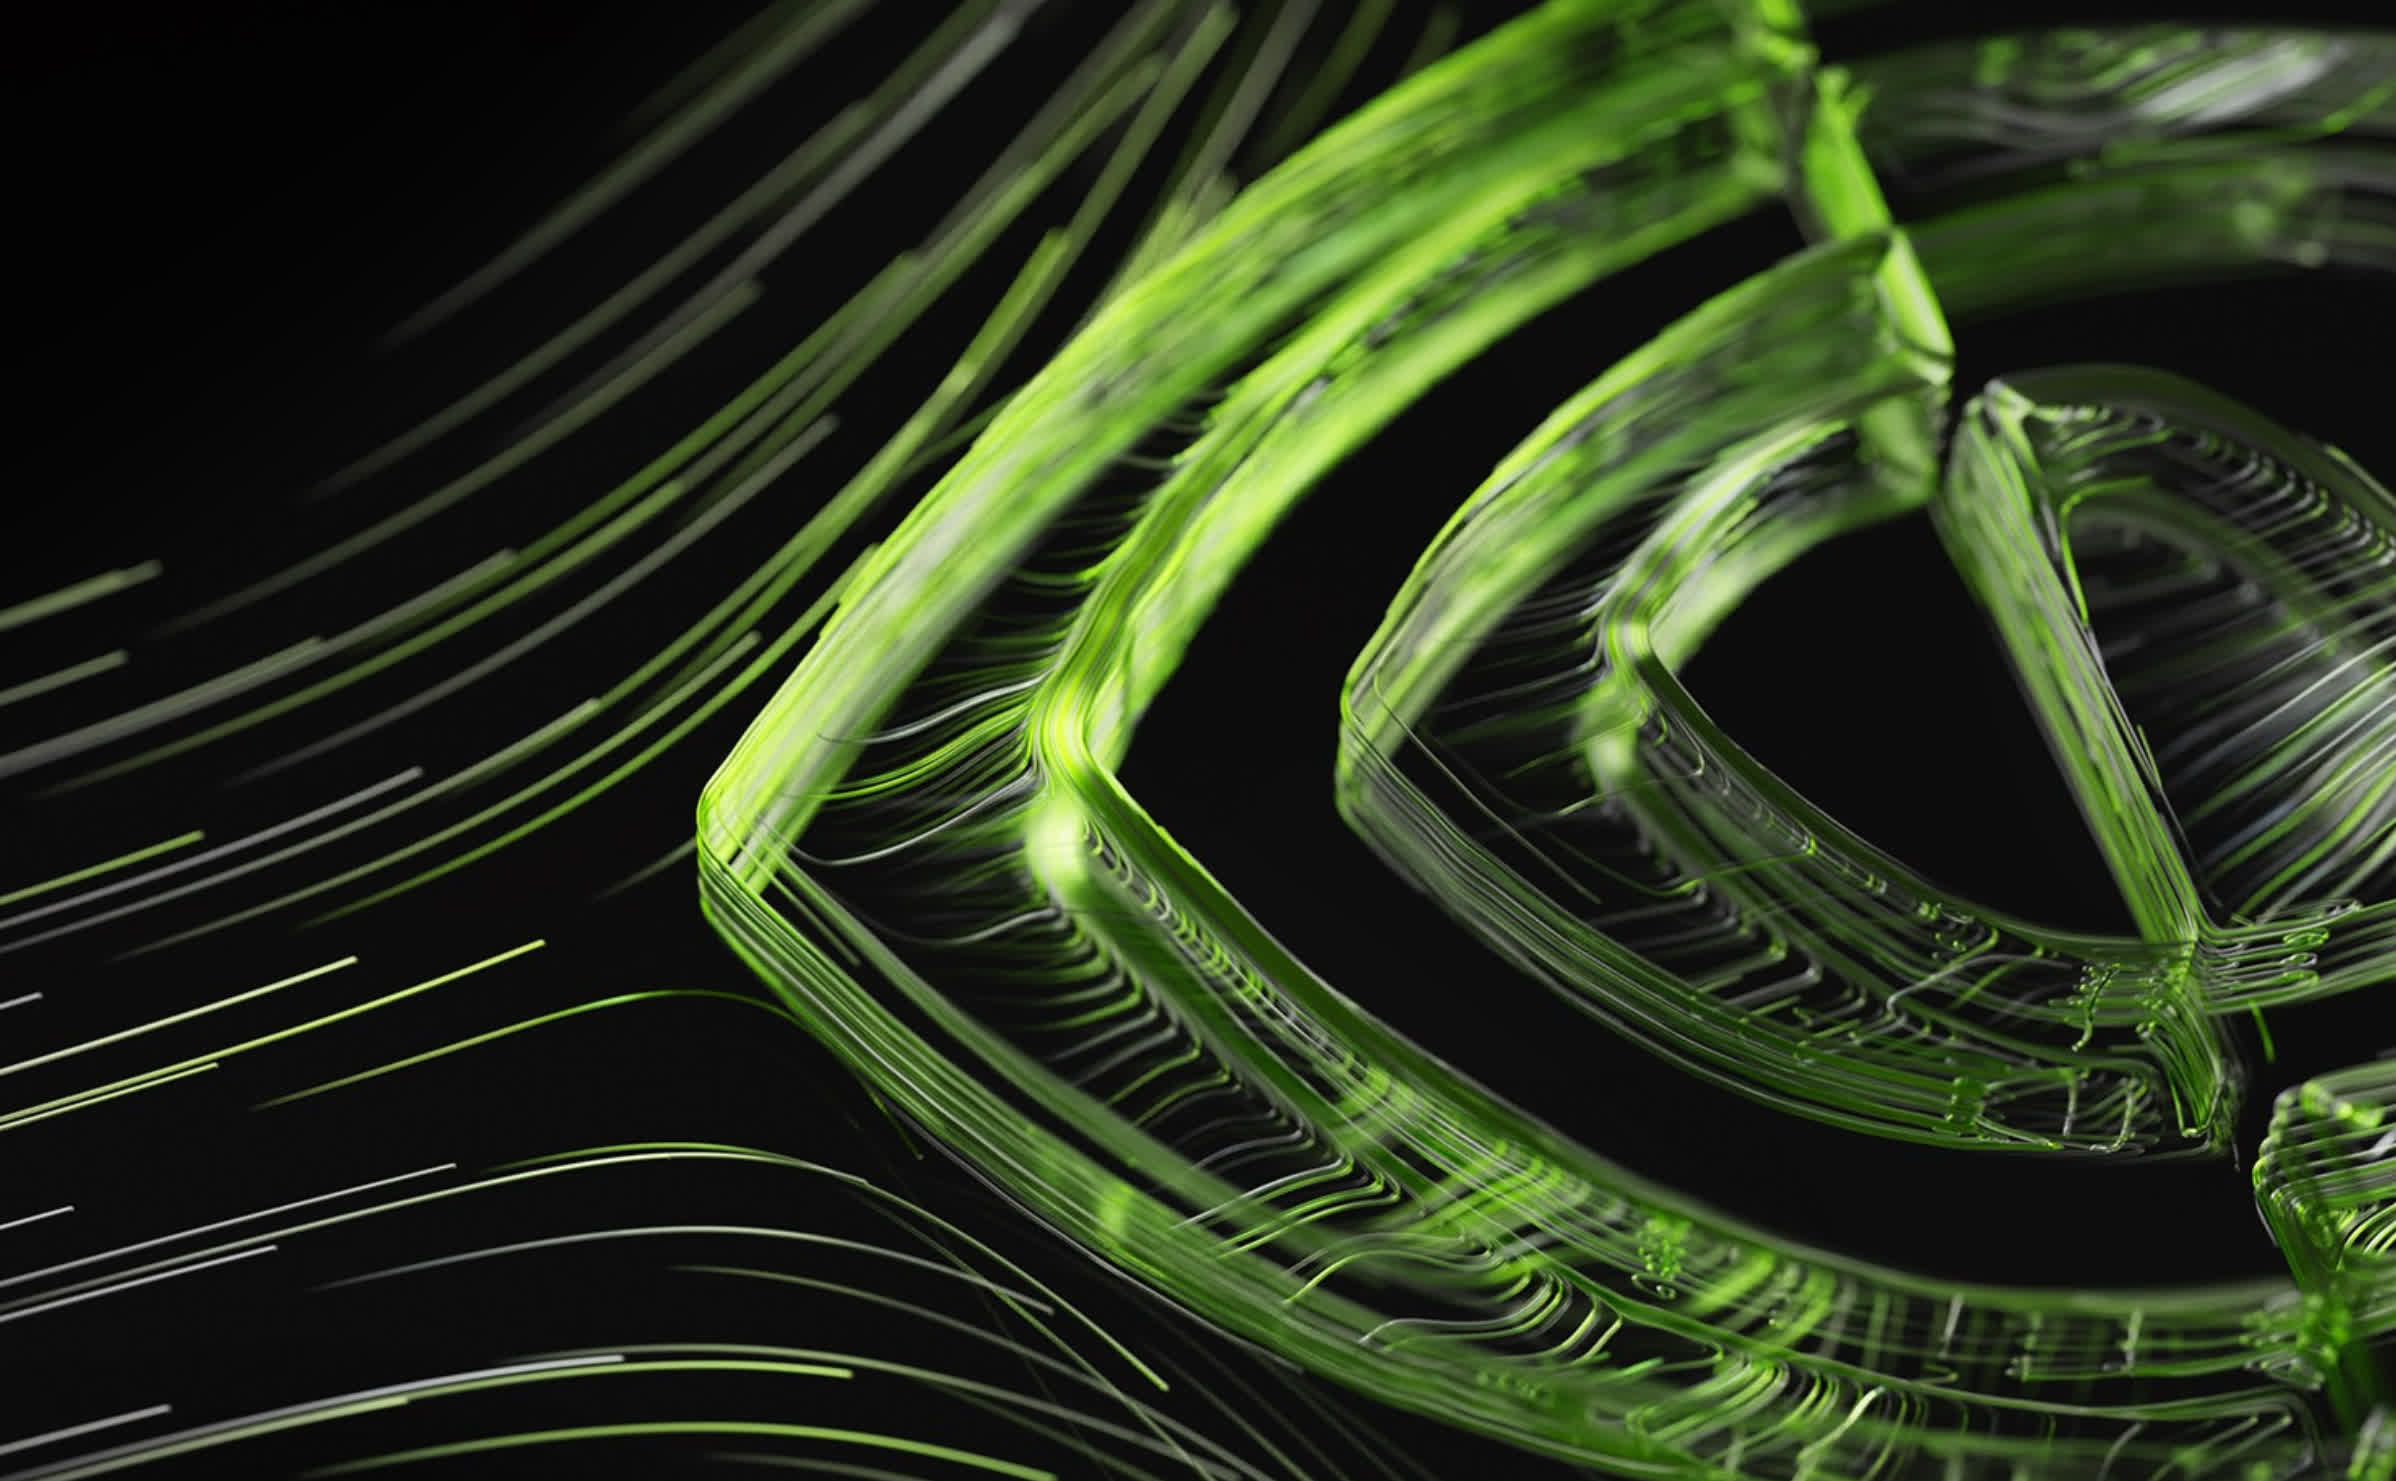 Nvidia details Neural Texture Compression, claims significant improvements over traditional methods